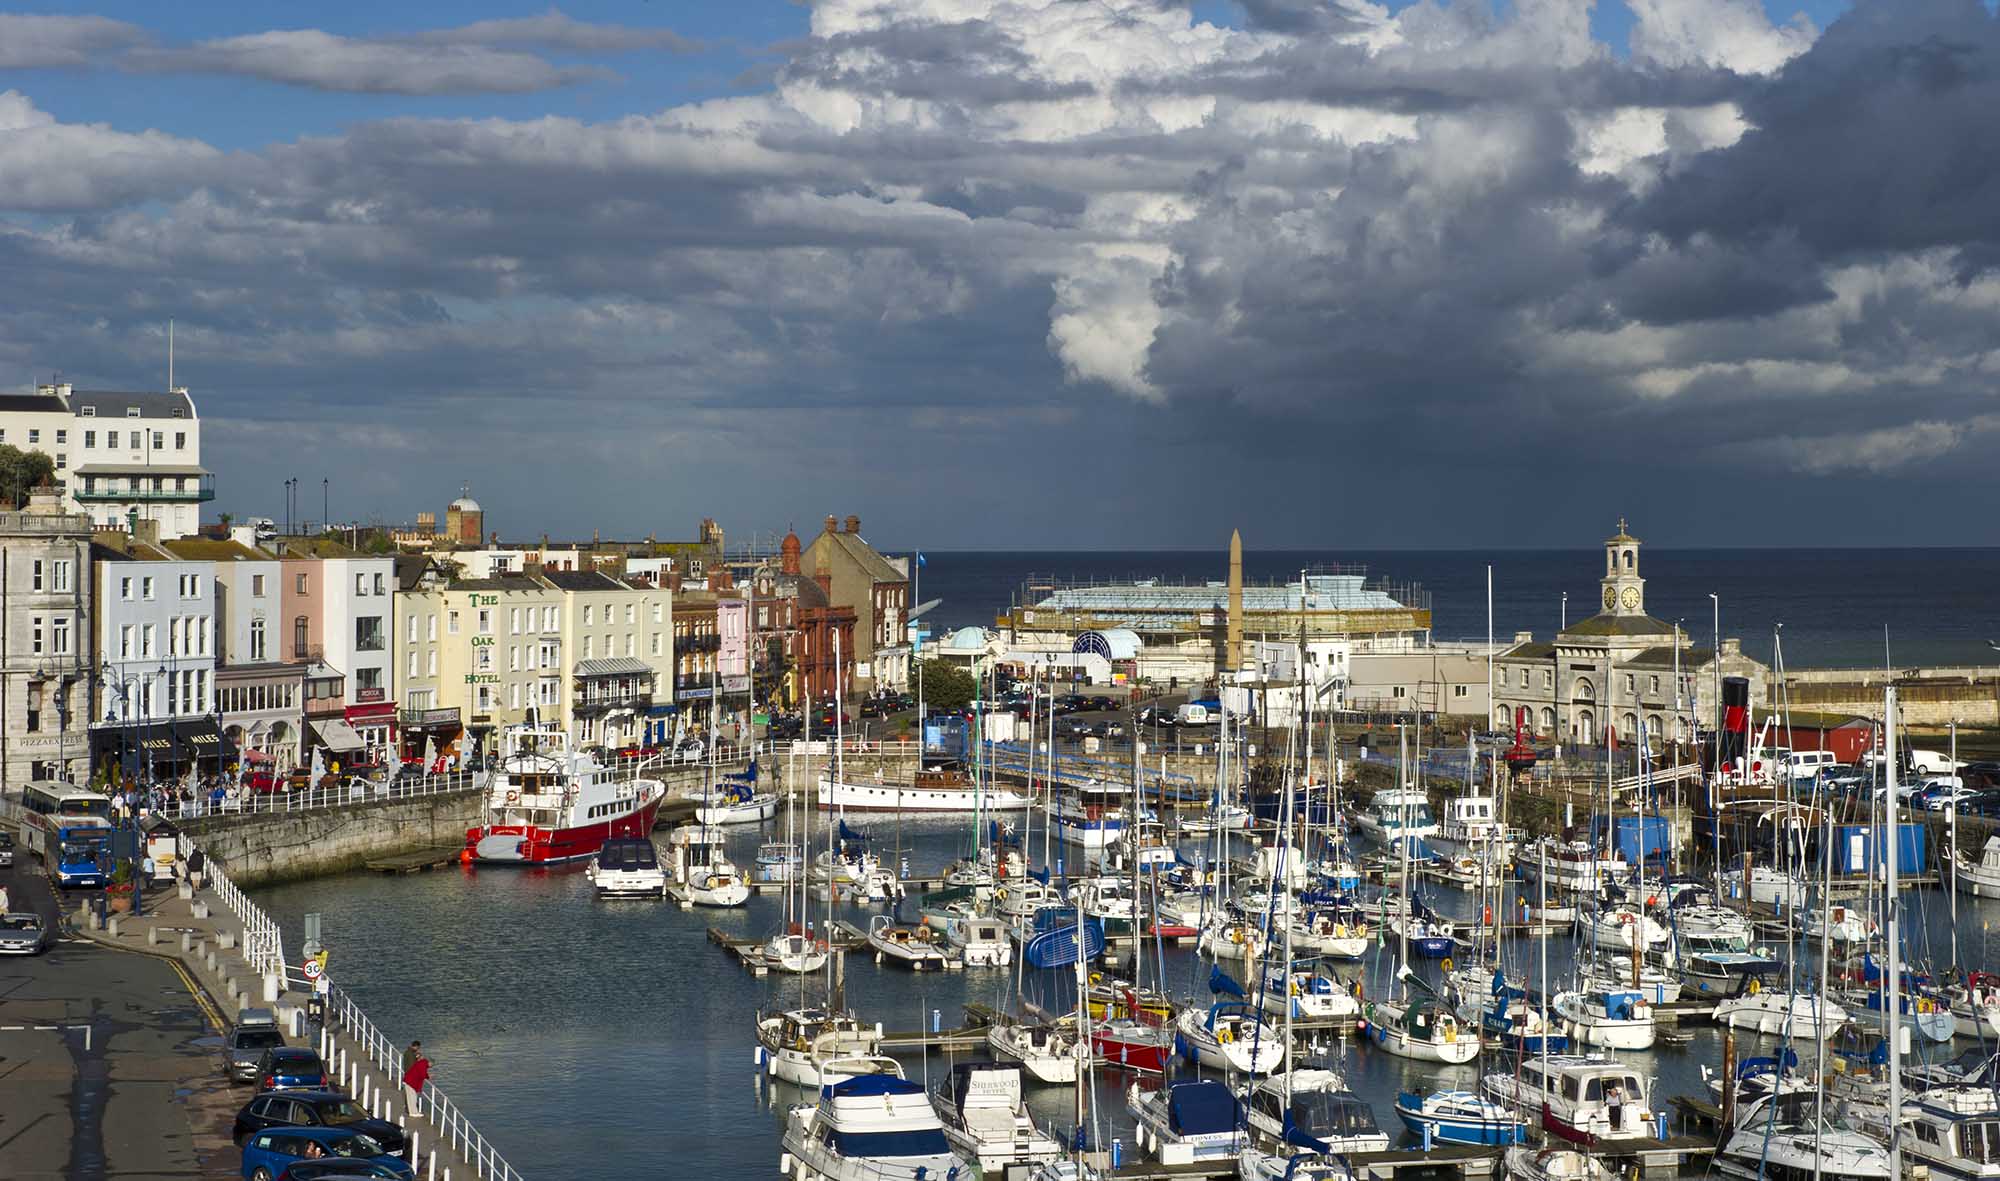 View of Ramsgate harbour